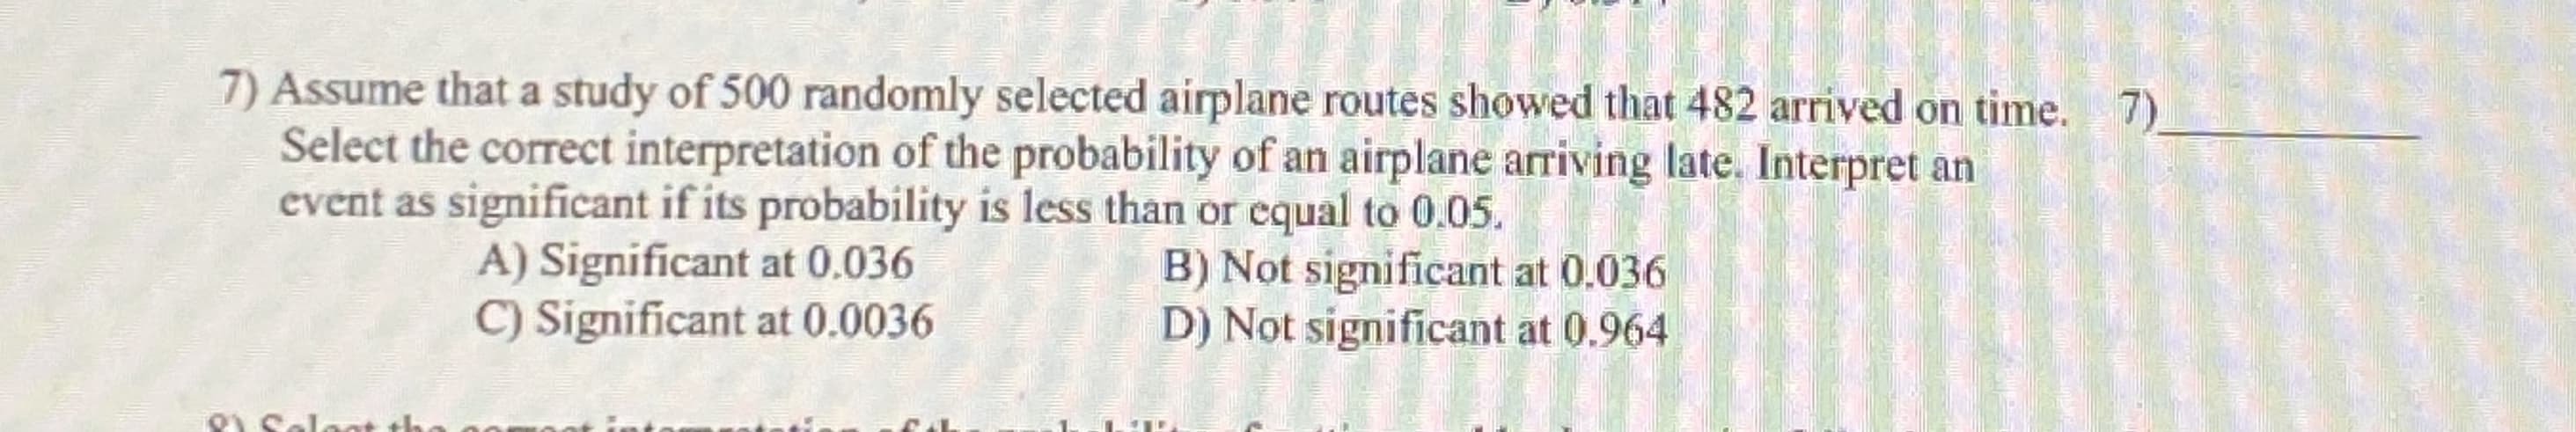 Assume that a study of 500 randomly selected airplane routes showed that 482 arrived on time.
Select the correct interpretation of the probability of an airplane arriving late. Interpret an
event as significant if its probability is less than or equal to 0.05.
A) Significant at 0.036
C) Significant at 0.0036
B) Not significant at 0.036
D) Not significant at 0.964
